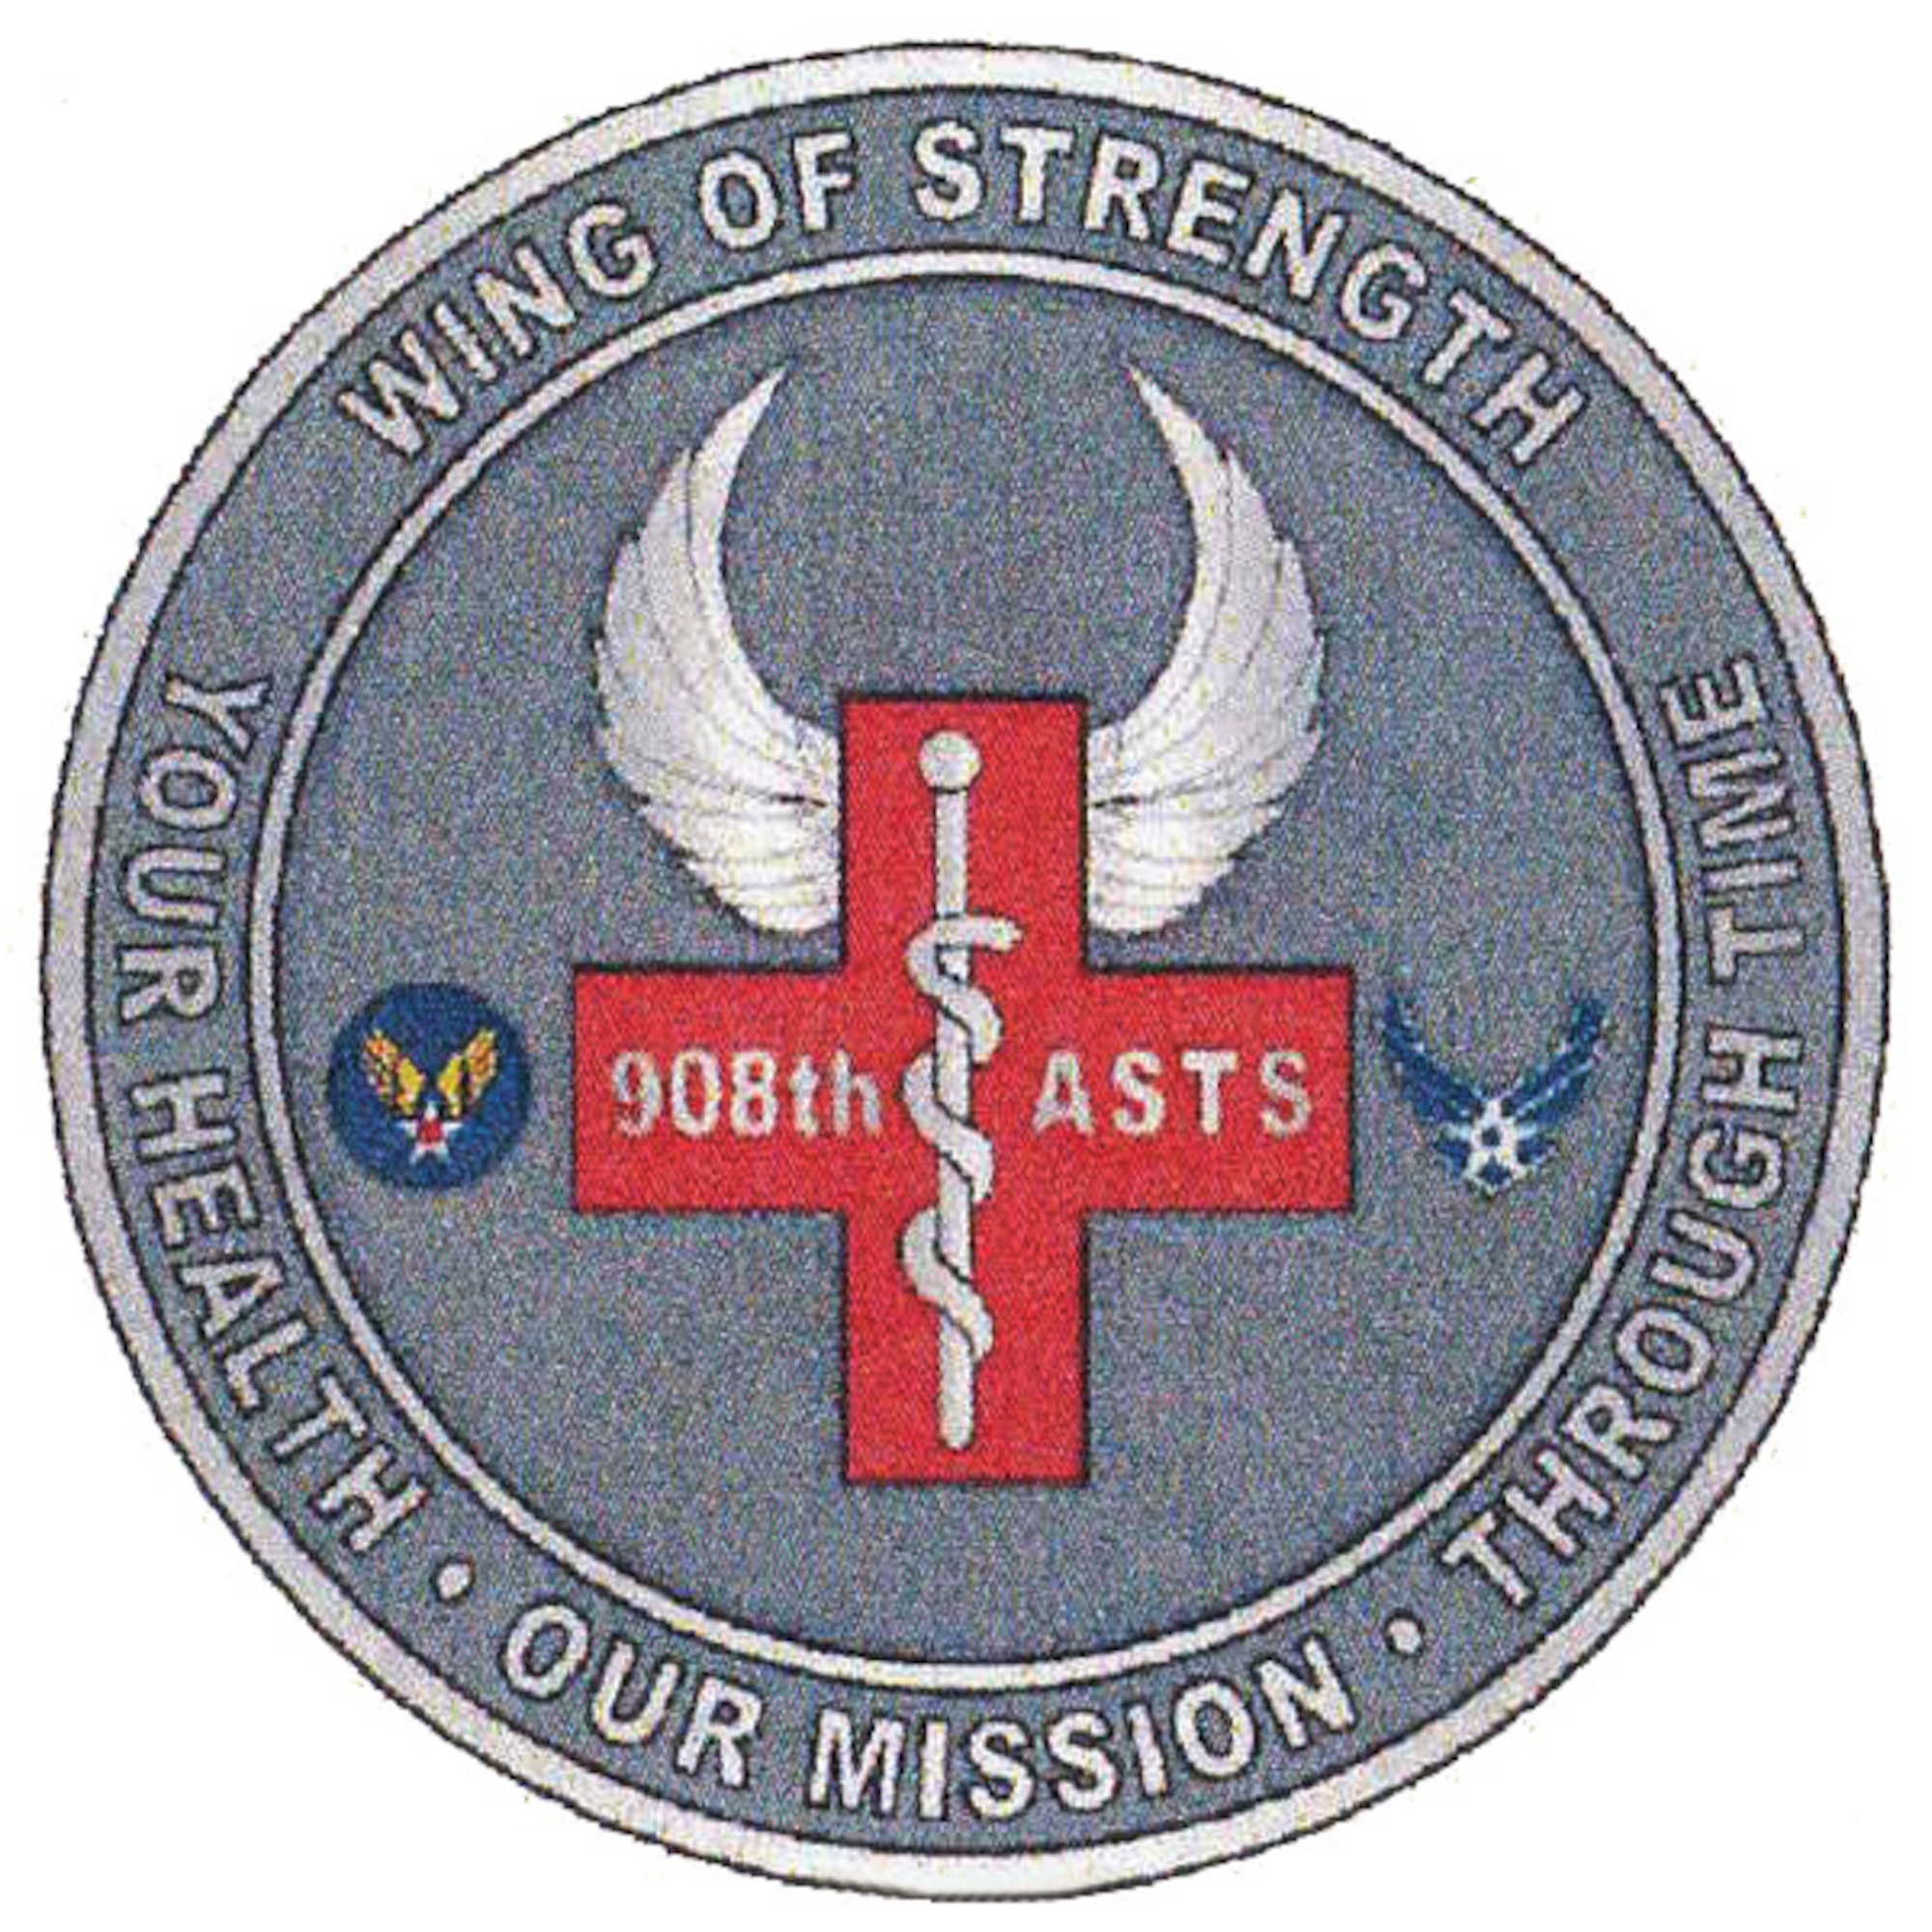 We are The 908th: The 908th Aeromedical Staging Squadron > 908th